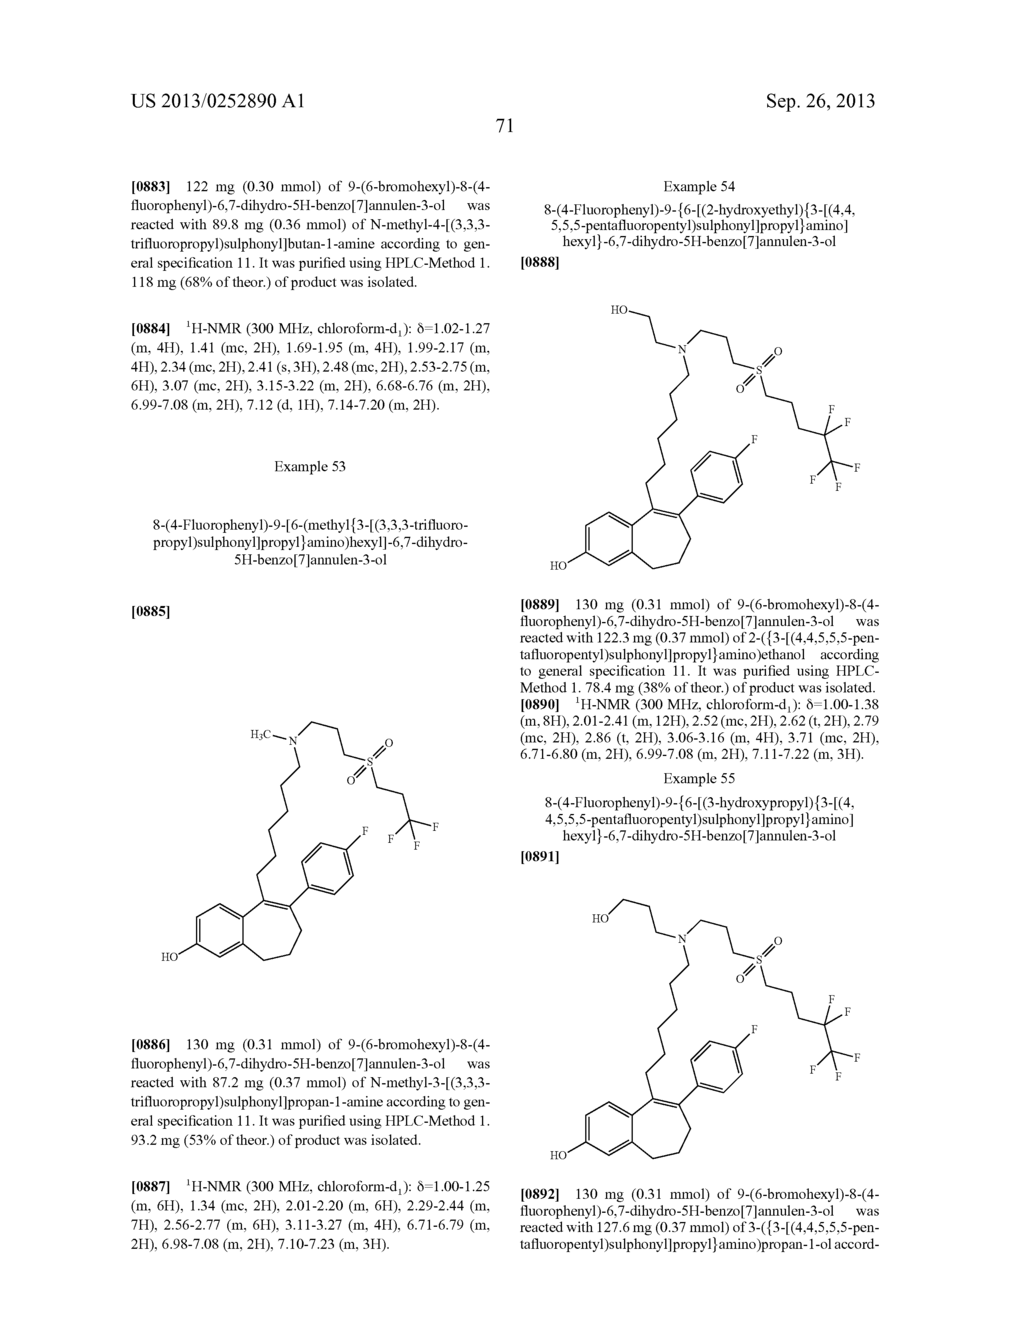 6,7-DIHYDRO-5H-BENZO[7]ANNULENE DERIVATIVES, PROCESS FOR PREPARATION     THEREOF, PHARMACEUTICAL PREPARATIONS COMPRISING THEM, AND THE USE THEREOF     FOR PRODUCTION OF MEDICAMENTS - diagram, schematic, and image 79